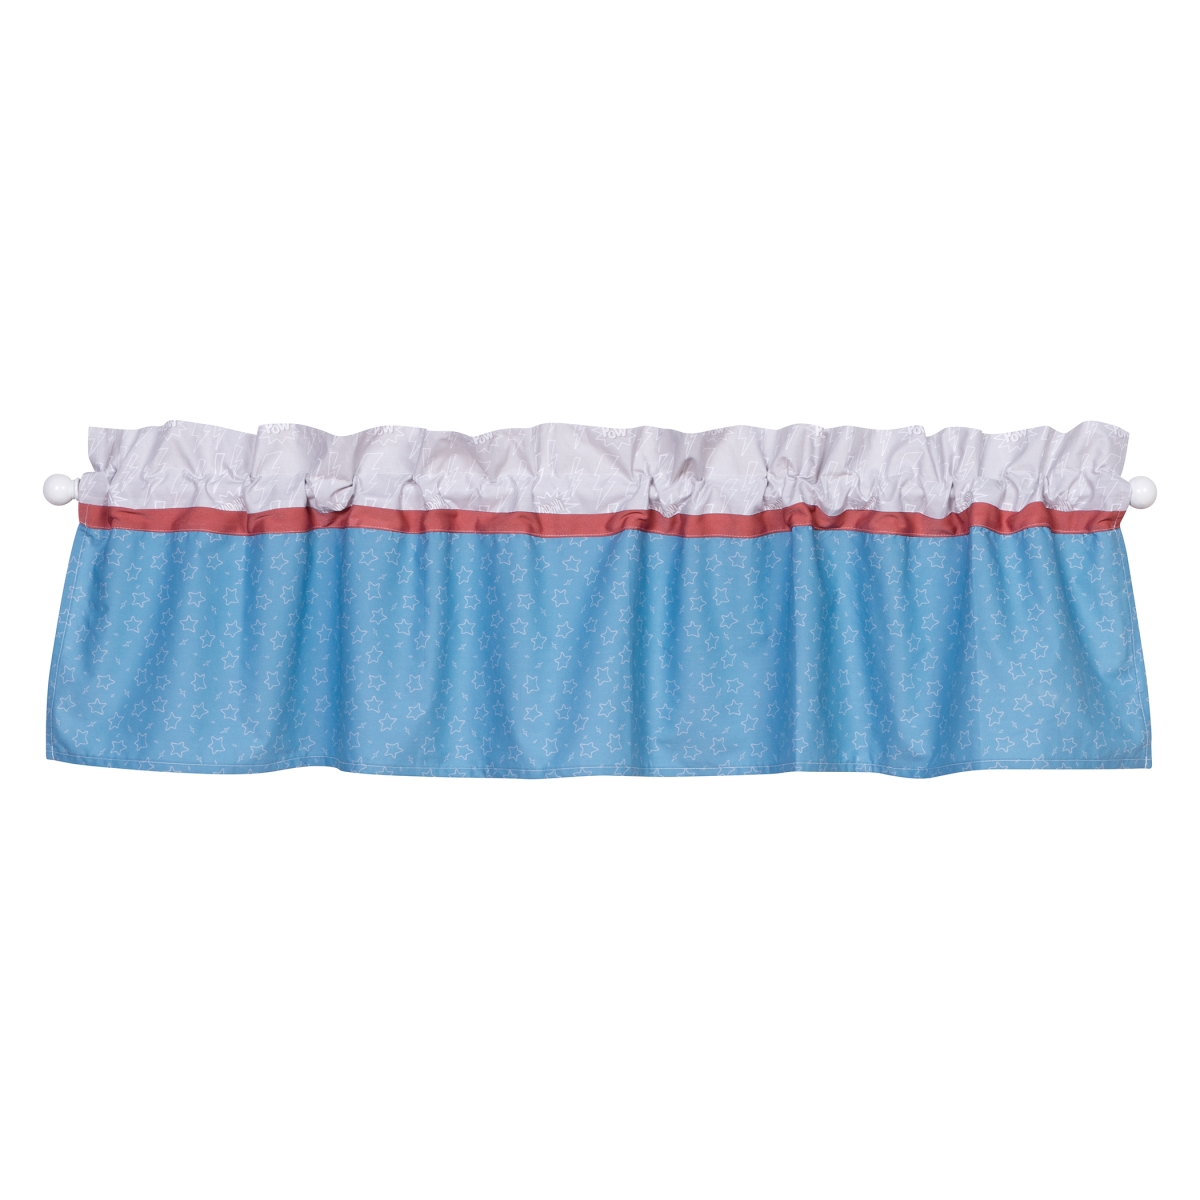 Trend-lab 102438 Superheroes Window Valance, Blue, Gray, Red & White